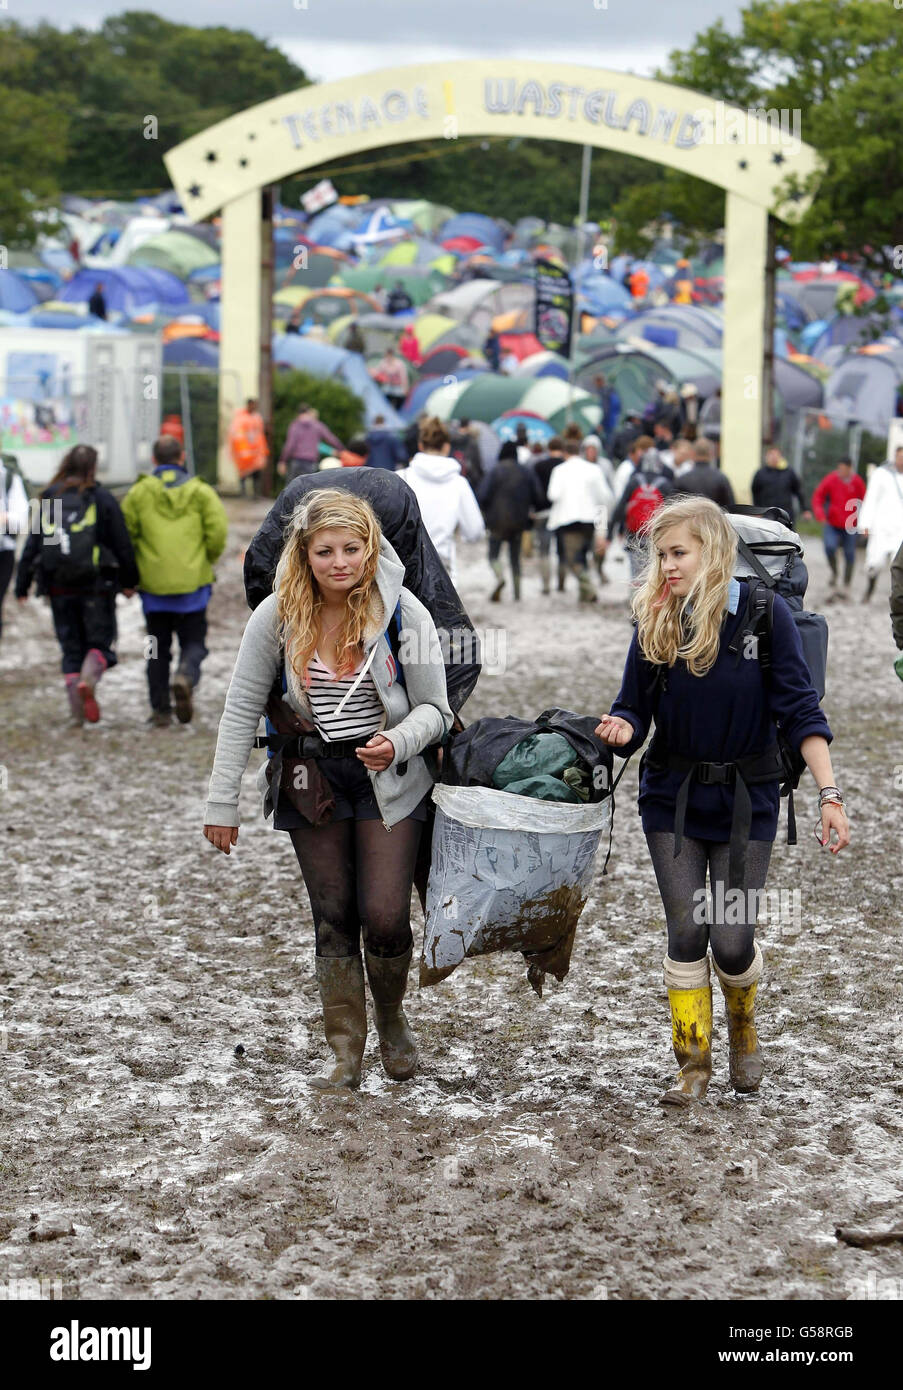 Revellers walk through the muddy campsite at the Isle of Wight festival, after heavy rains turned the site into a mudbath causing traffic chaos. Stock Photo